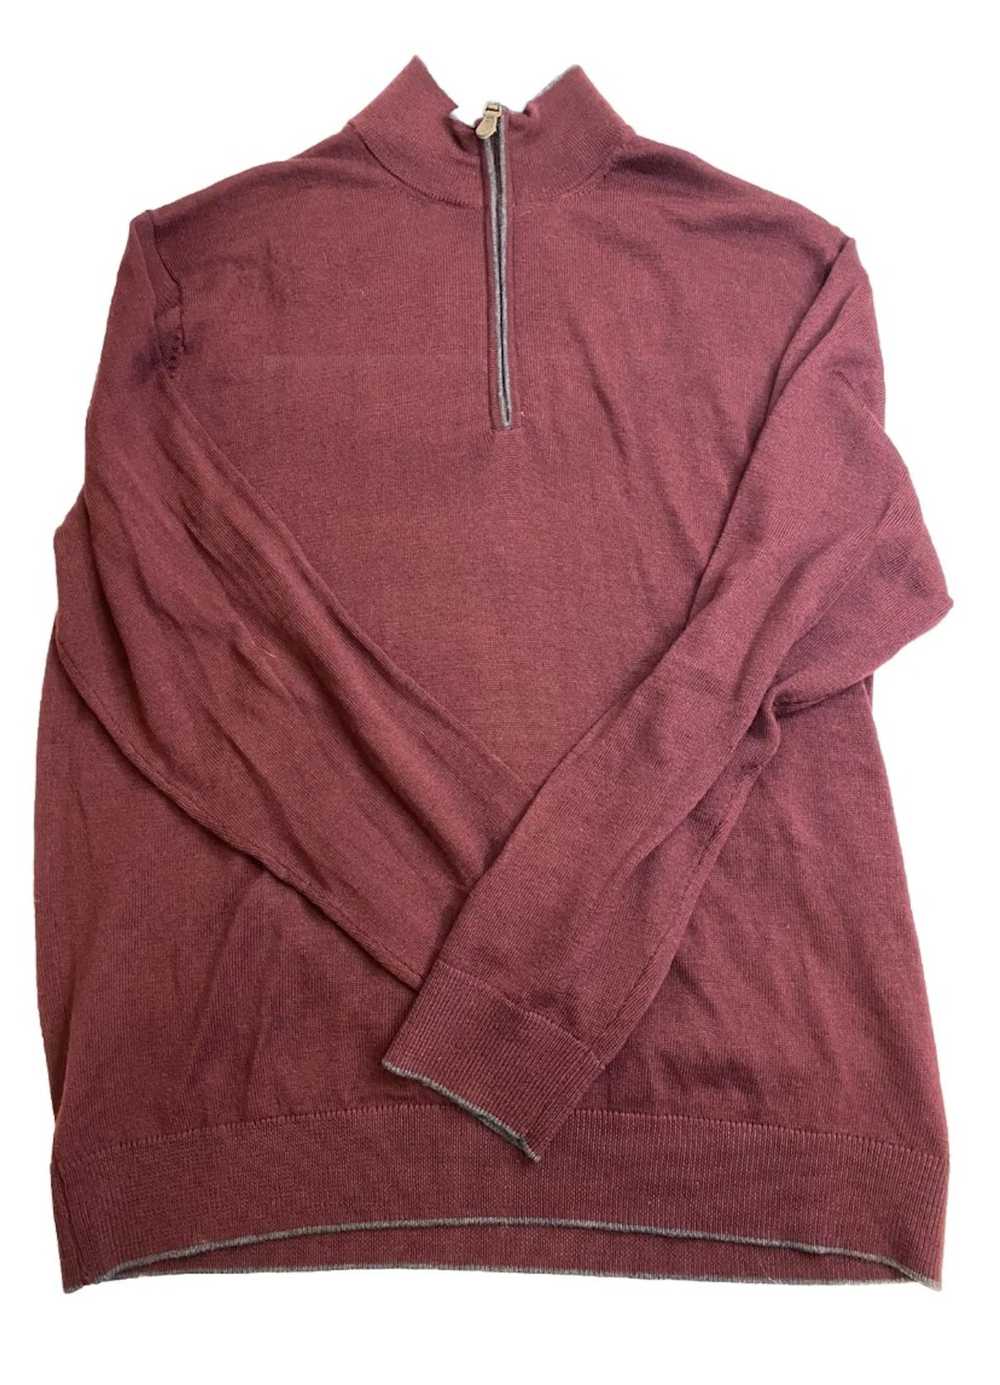 Other Raffi Sweater Mens Extra Large Maroon 100% … - image 4